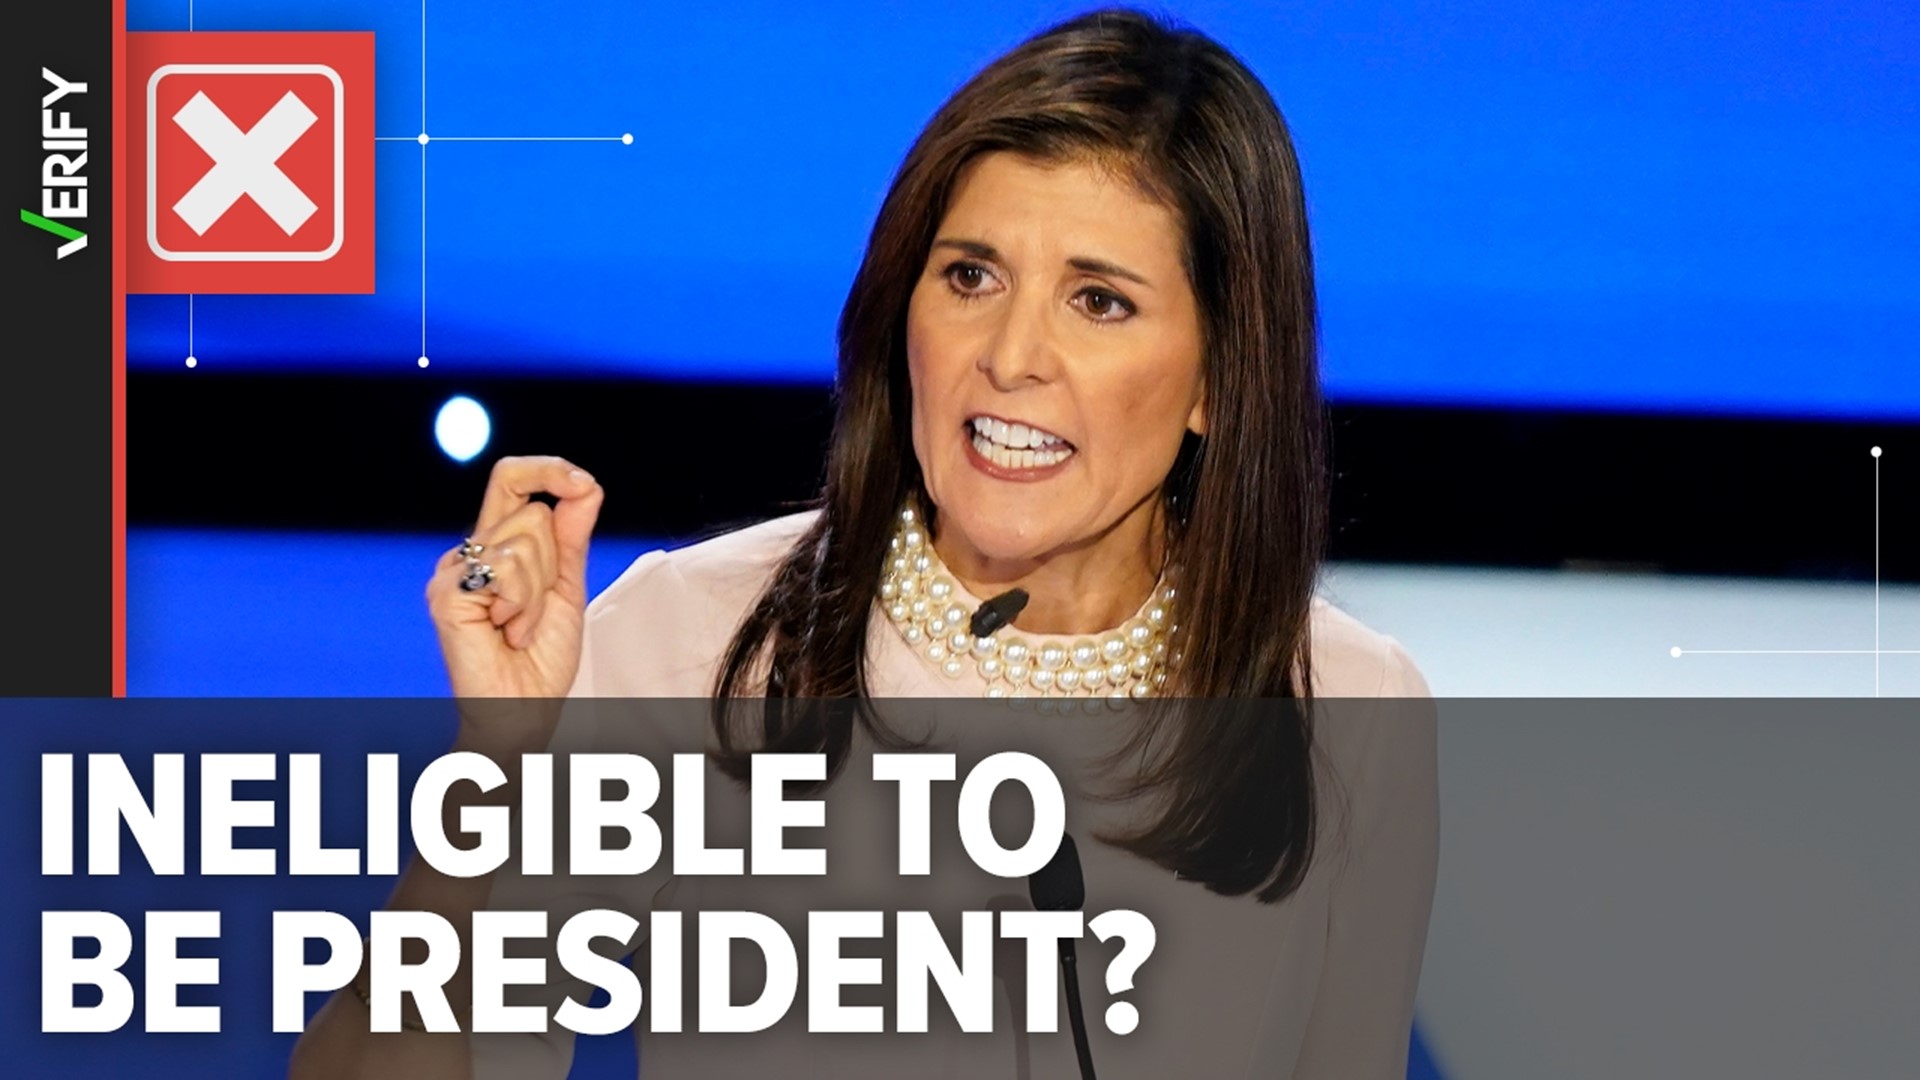 Trump and others falsely claim Nikki Haley is ineligible to be president because her parents weren’t U.S. citizens when she was born.